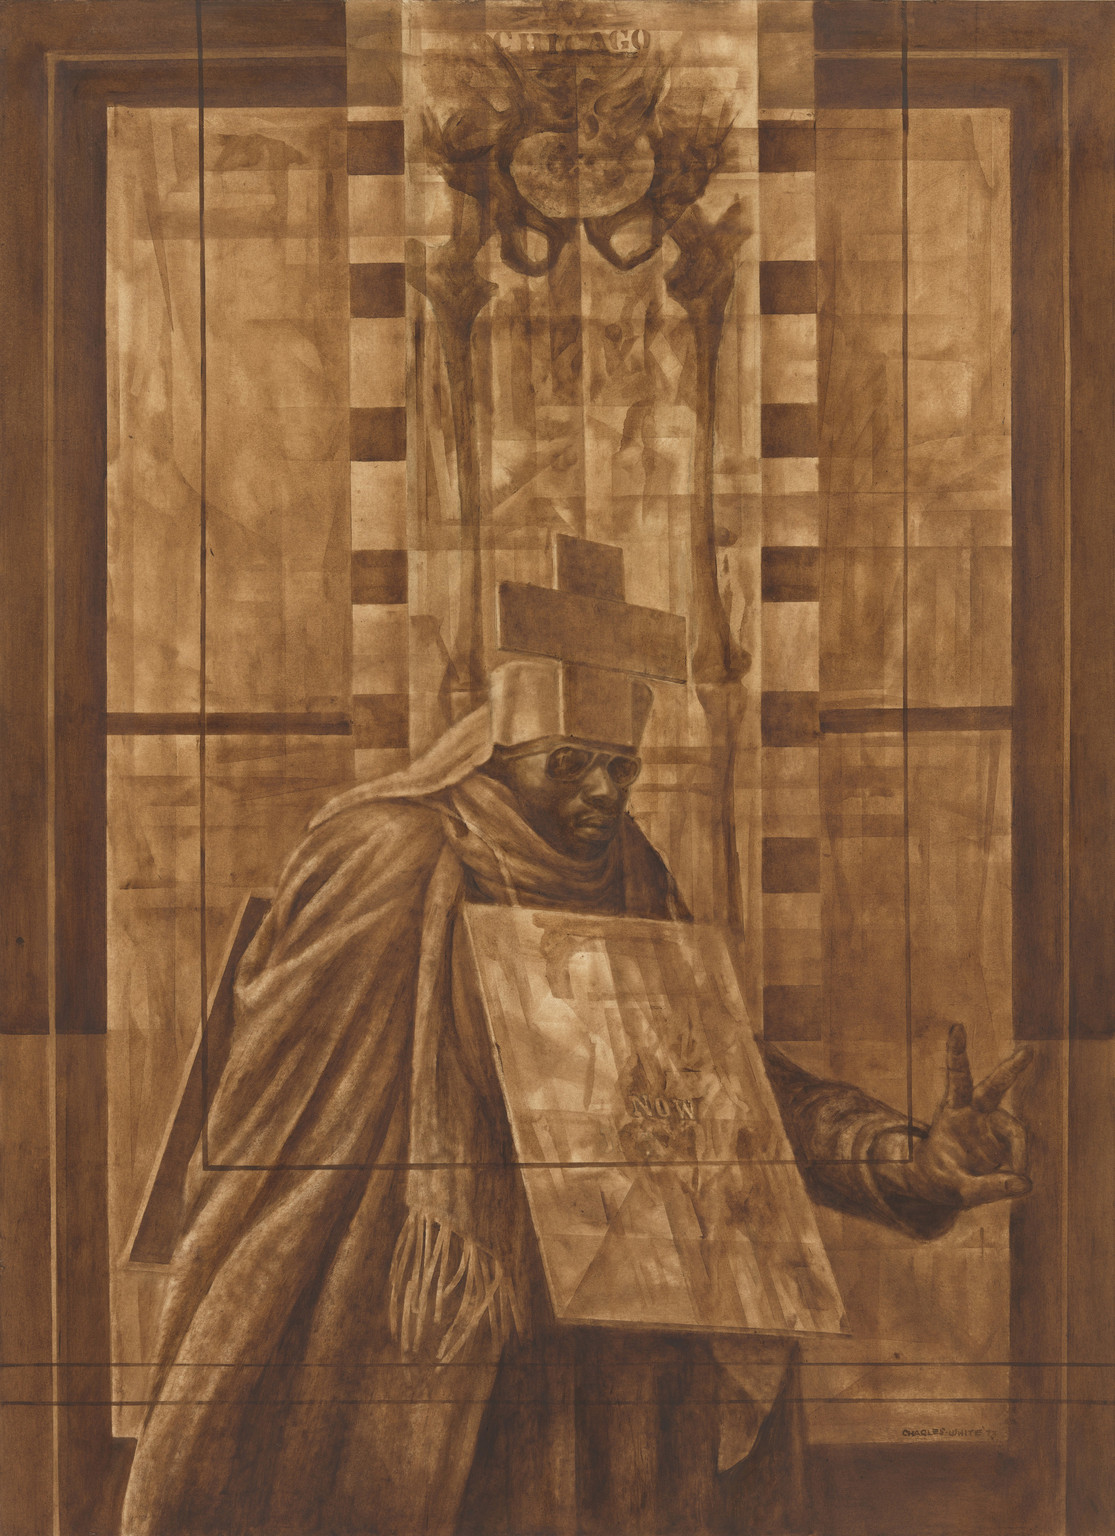 Charles White (American, 1918-1979). Black Pope (Sandwich Board Man), 1973. Oil wash on board. 60 × 43 7/8 in. (152.4 × 111.4 cm). The Museum of Modern Art, New York. Richard S. Zeisler Bequest (by exchange), The Friends of Education of The Museum of Modern Art, Committee on Drawings Fund, Dian Woodner, and Agnes Gund. © 2017 The Charles White Archives